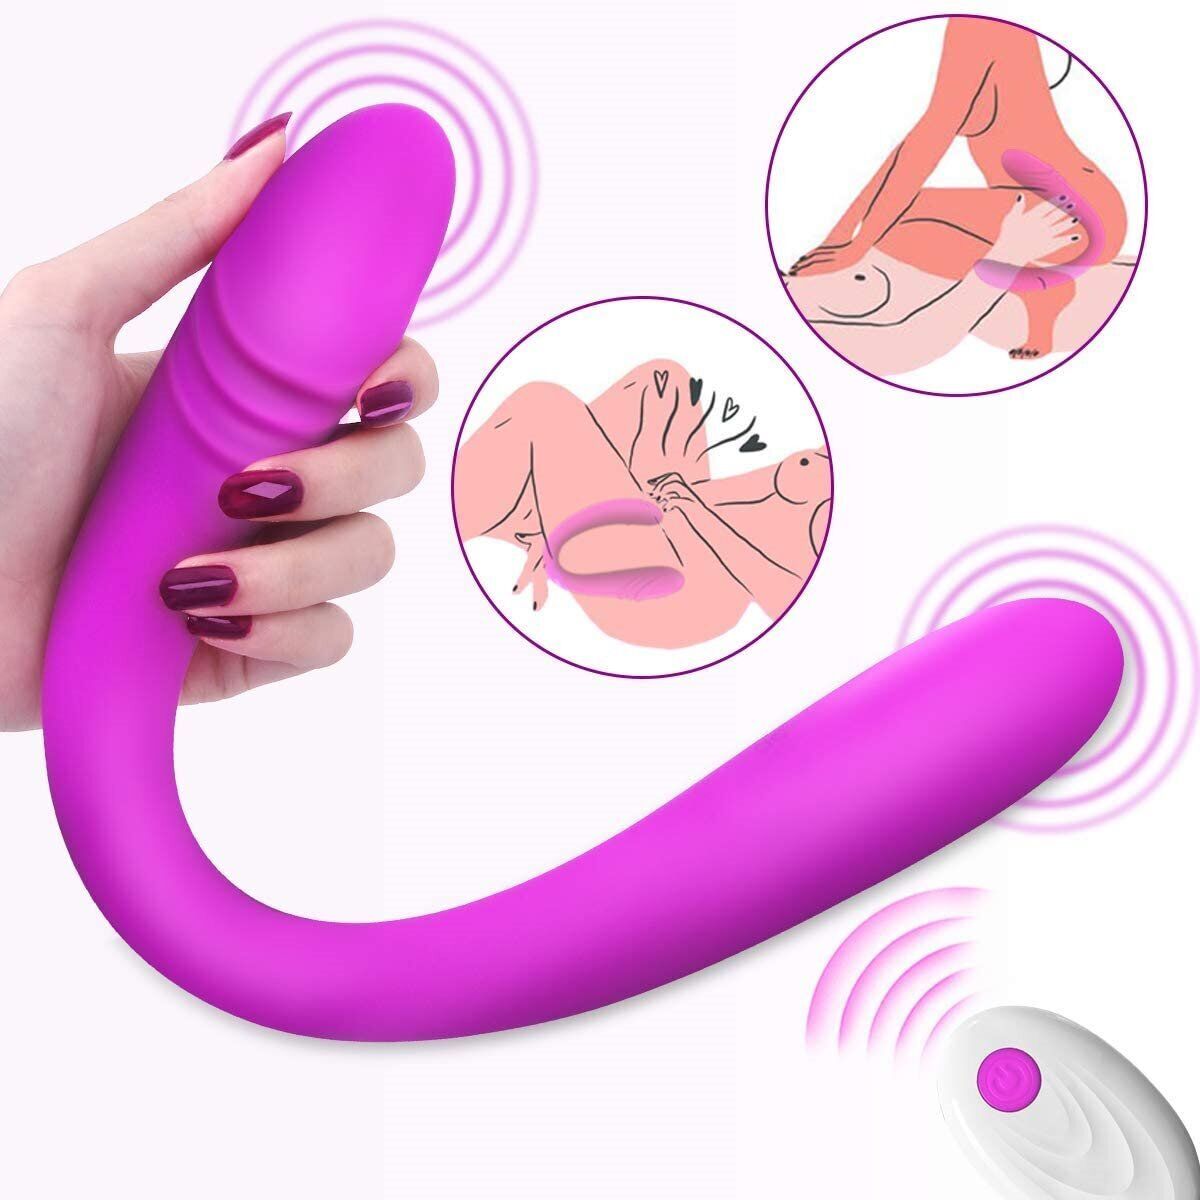 Wireless Flexible Double Ended G-spot Anal Vibrator Dildo Dong Sex-toy for Women